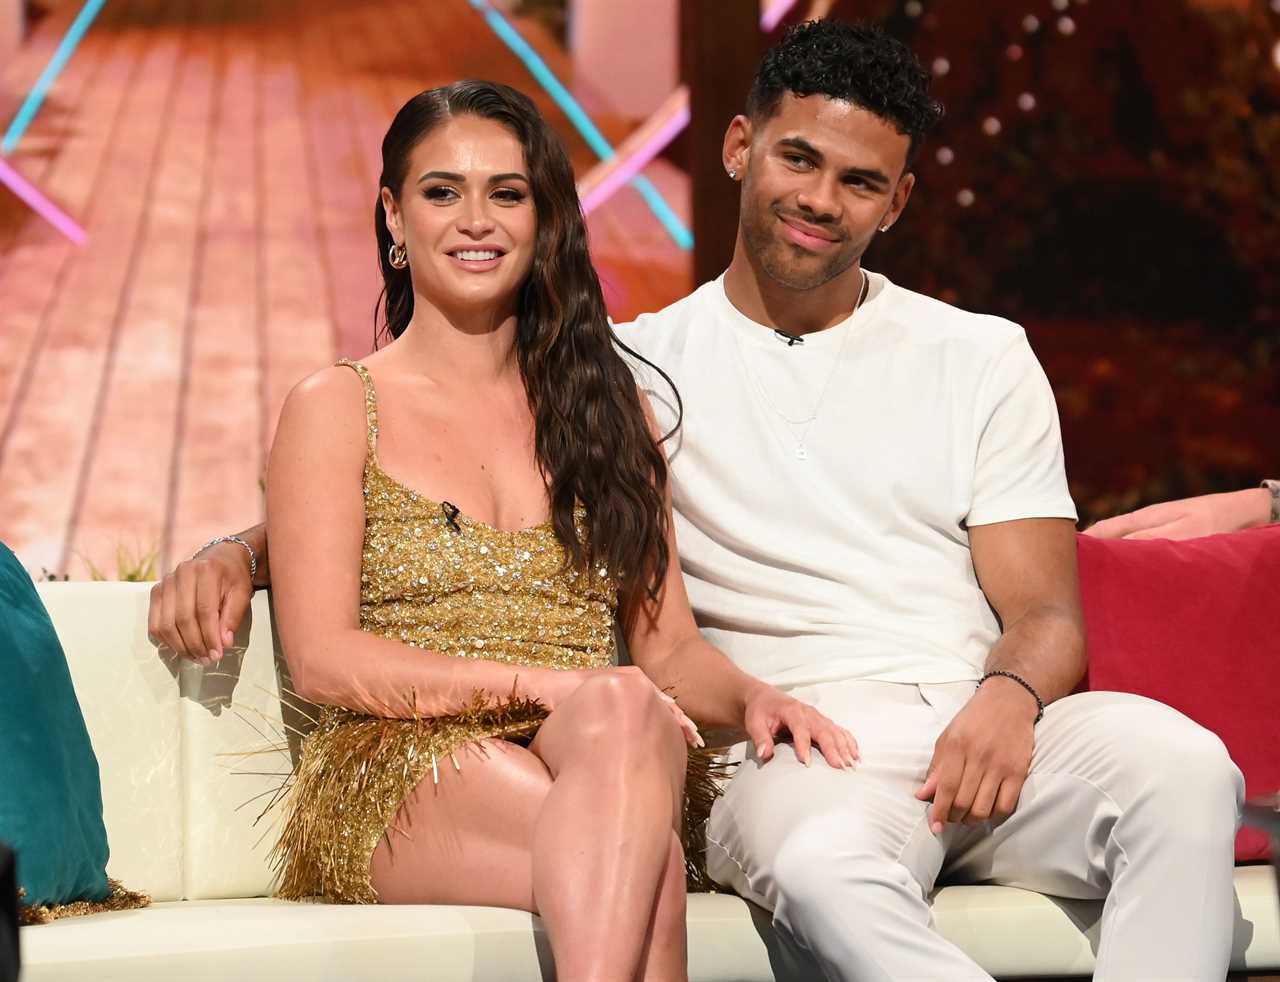 Love Island couple branded ‘fake’ by fans convinced they’ve split after awkward reunion show